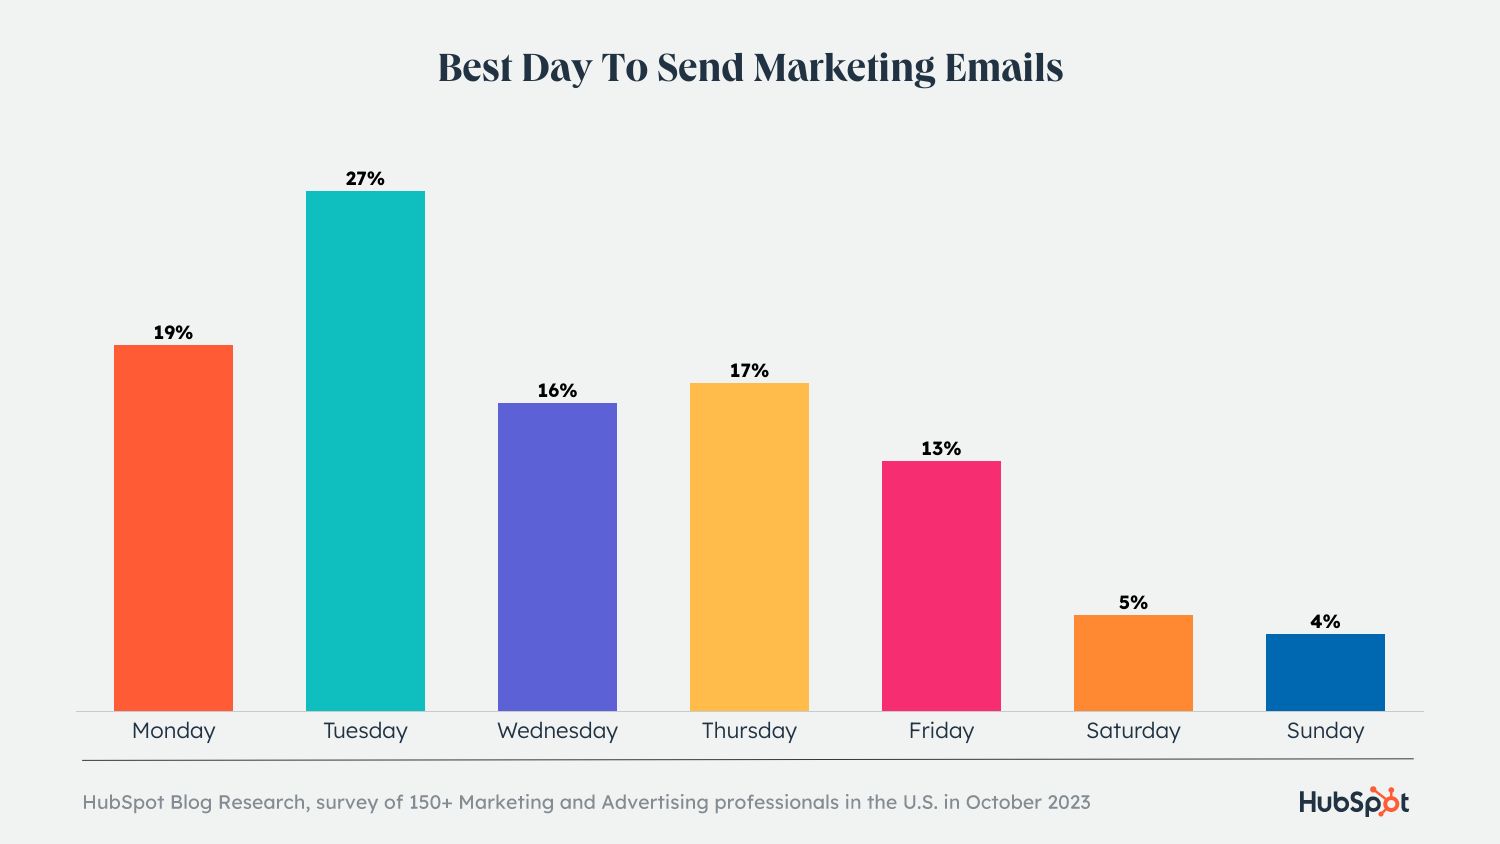 bar graph displaying the best days to send marketing emails